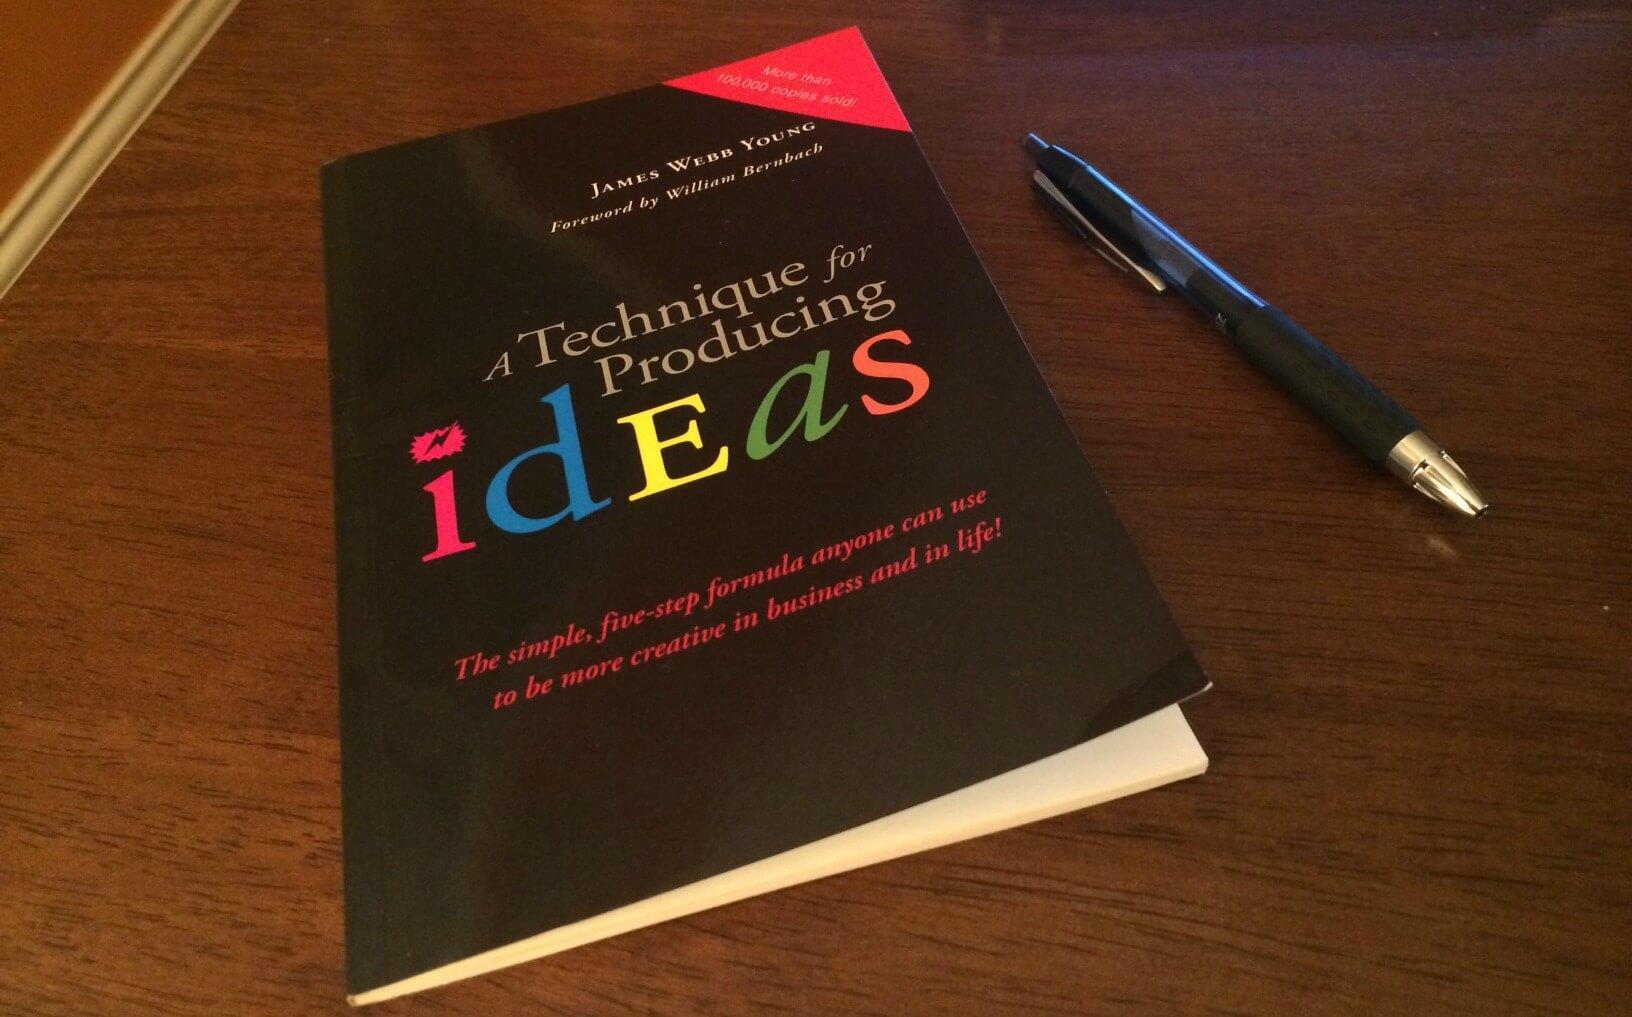 Book cover of James Webb Young's "A Technique for Producing Ideas"